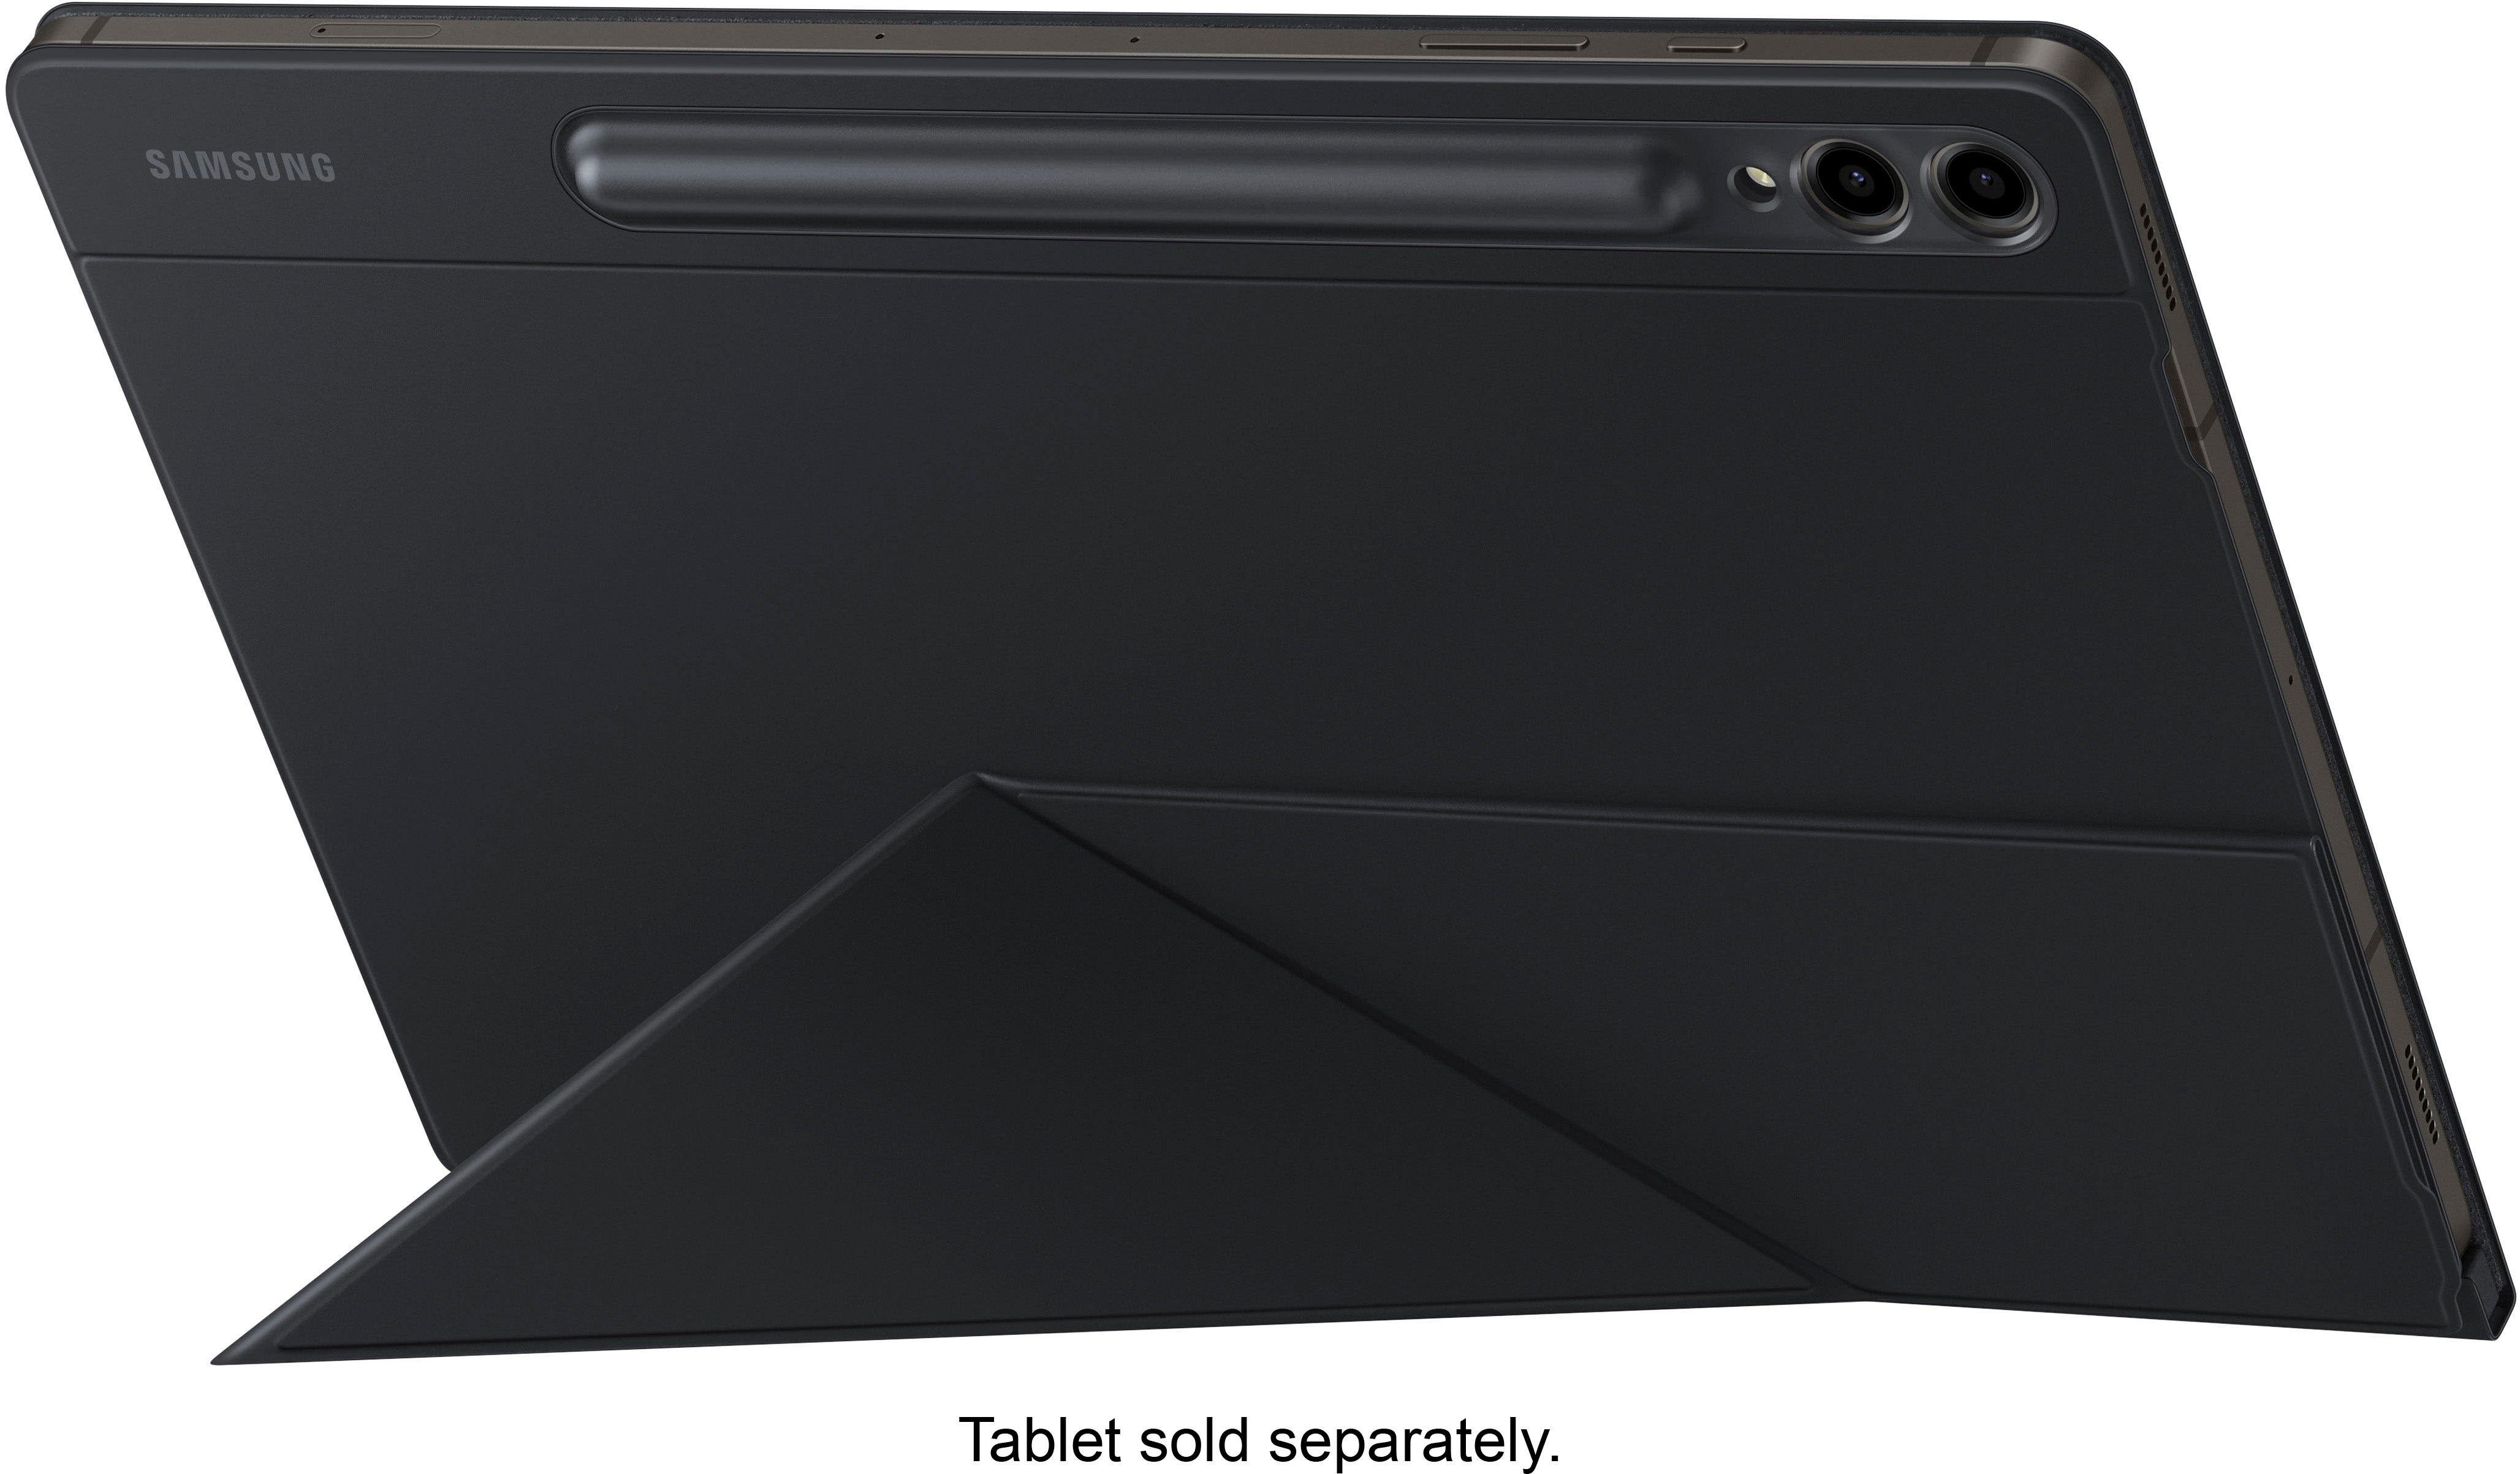 Samsung Galaxy Tab S9 FE, Galaxy Tab S9 FE+ with S Pen support,  water-resistant design launched in India - Times of India